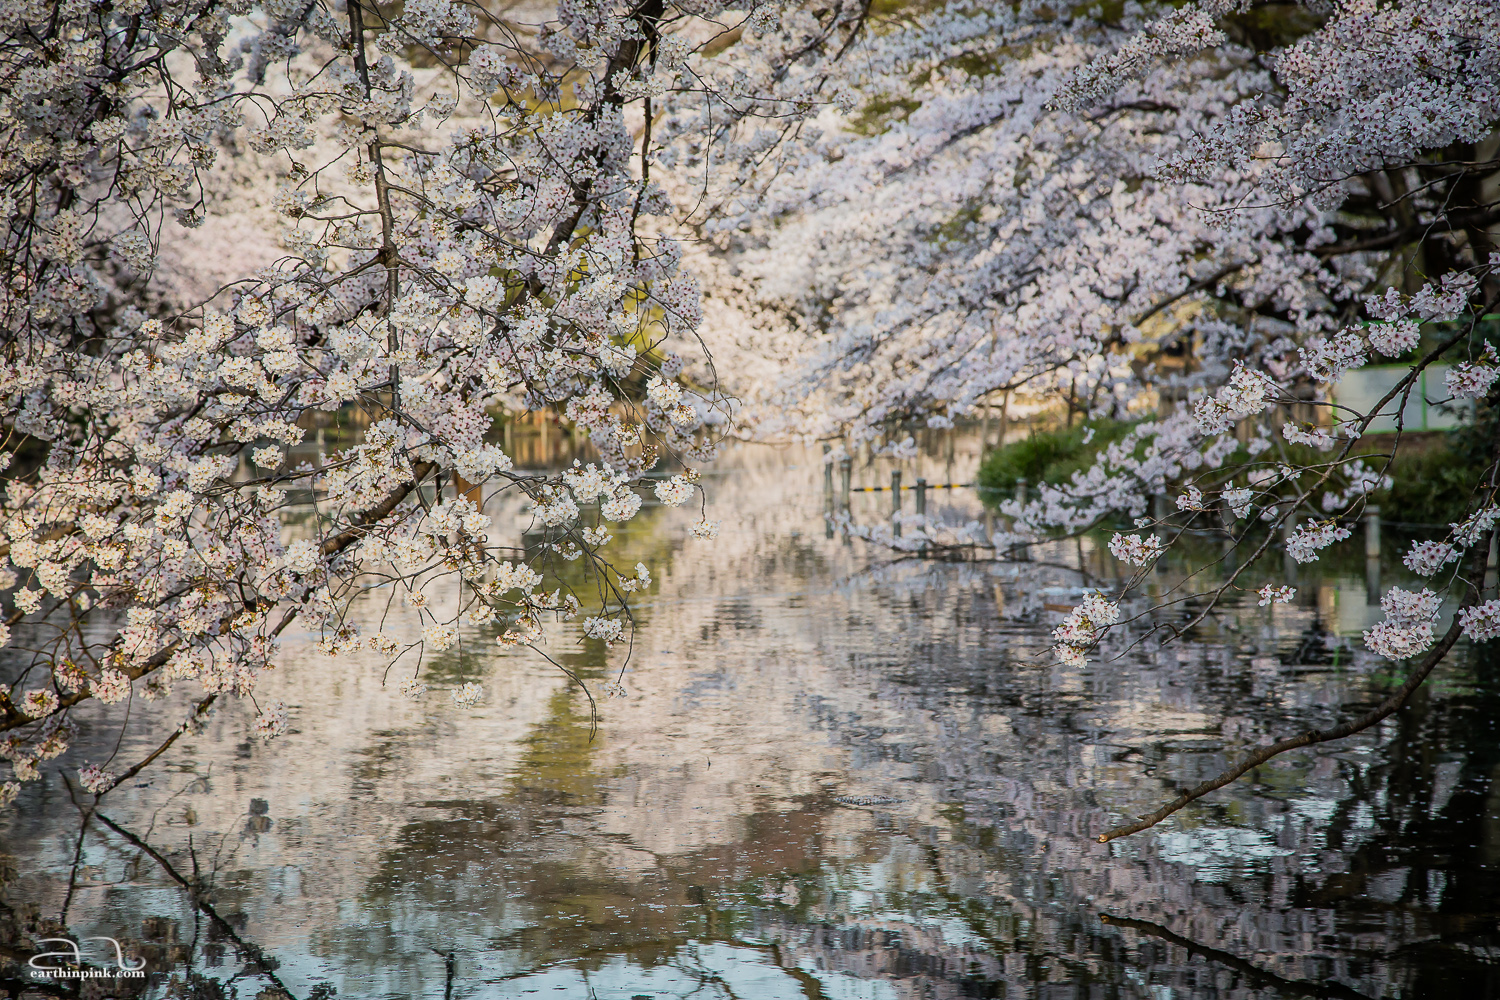 Layers upon layers of blossoms reflected on the pond of Inokashira Park in the sunrise light.